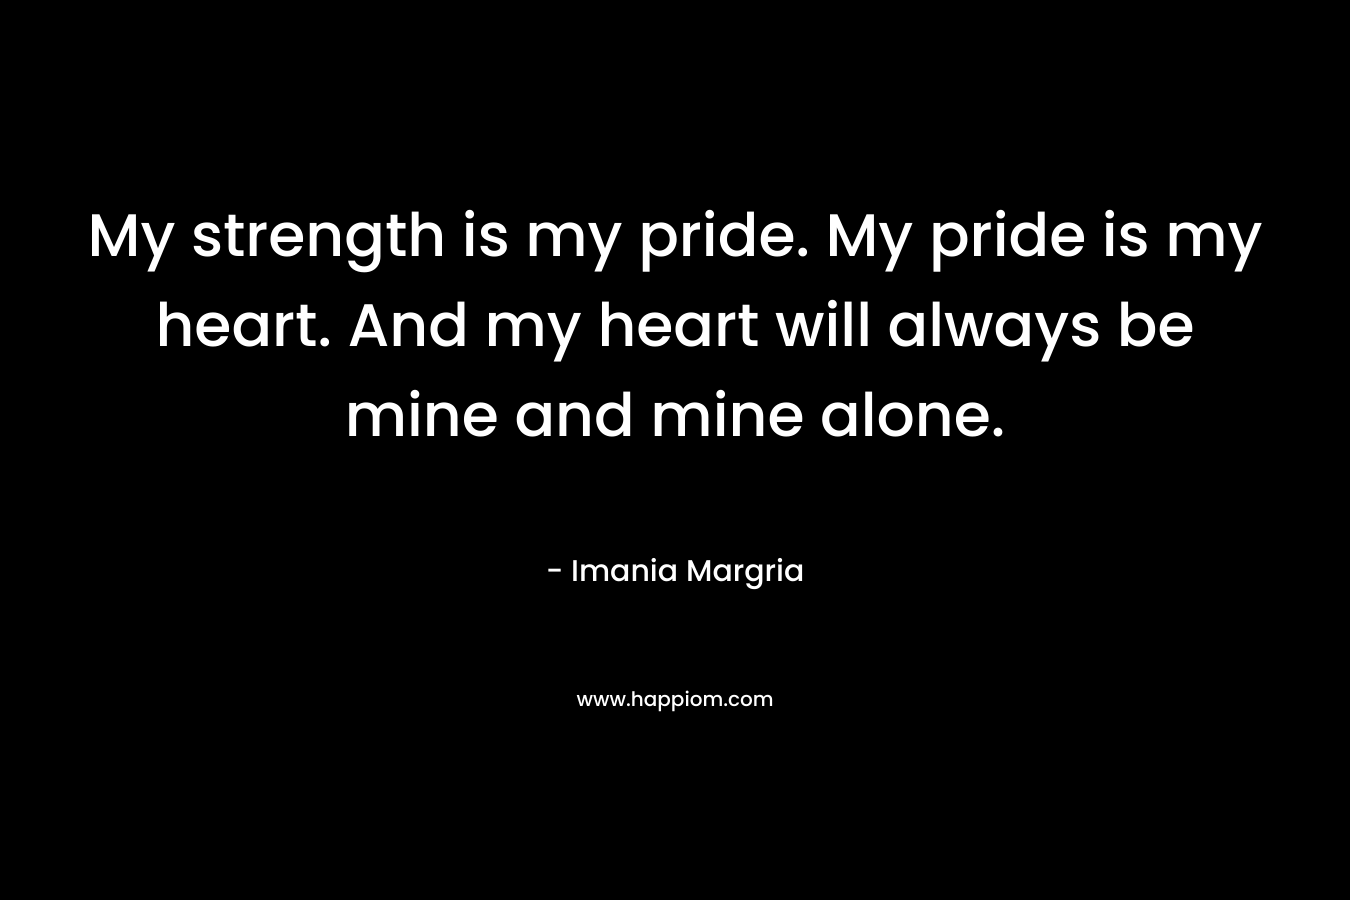 My strength is my pride. My pride is my heart. And my heart will always be mine and mine alone.